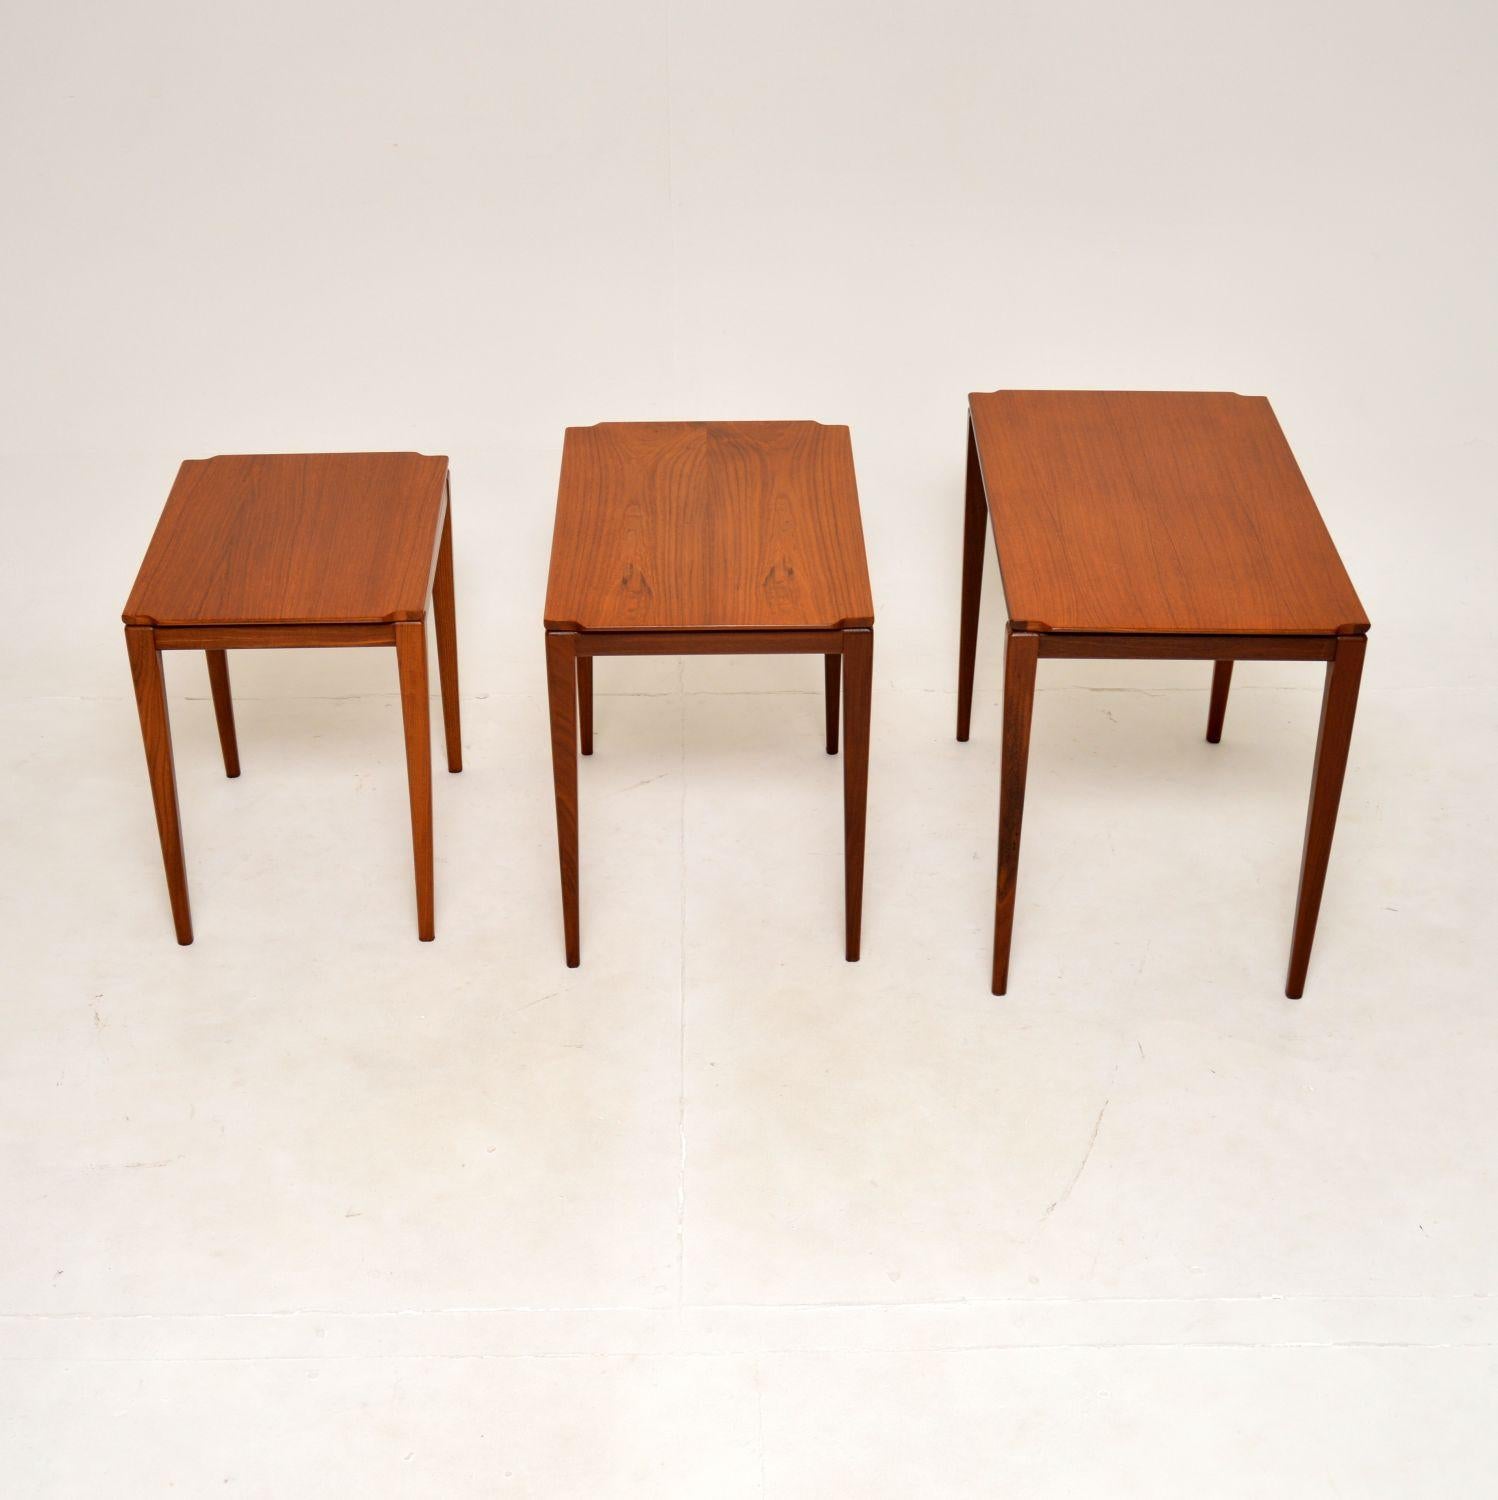 Mid-20th Century Vintage Teak Nest of Tables by Richard Hornby